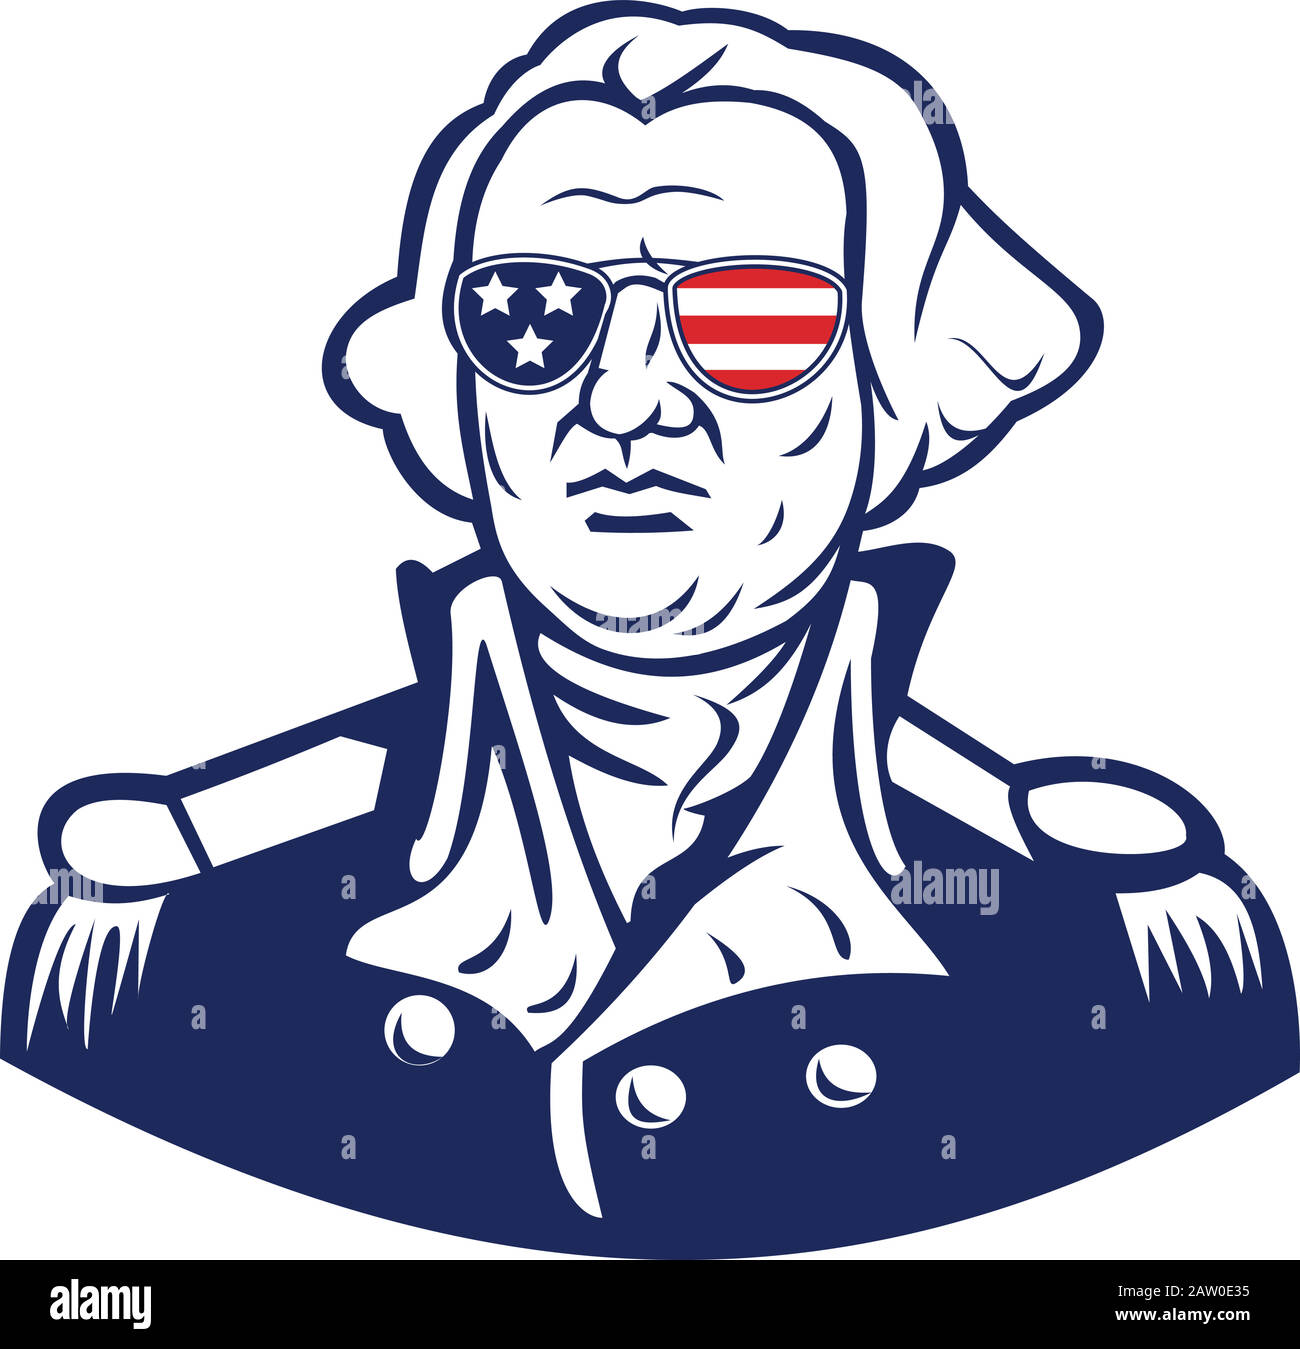 Mascot icon illustration of head of American president and founding father, George Washington wearing sunglasses with USA flag stars and stripes viewe Stock Vector